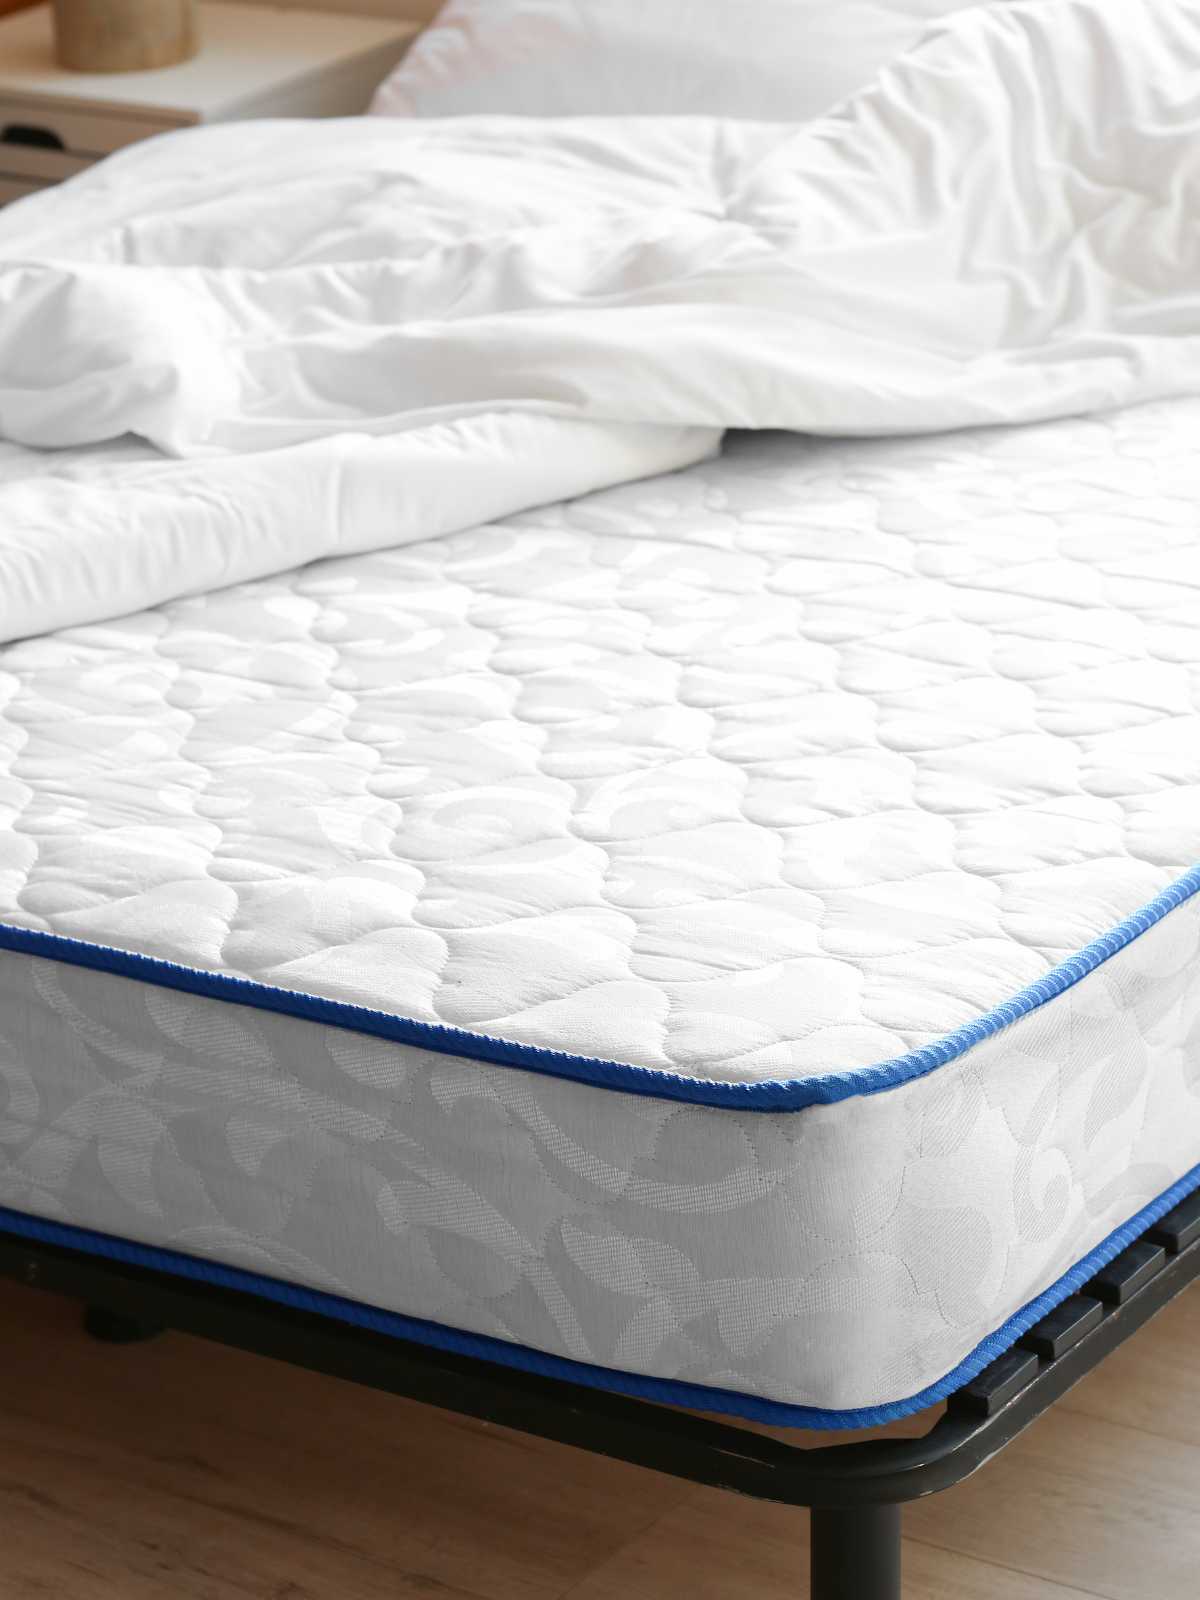 How To Remove Sweat Stains From A Mattress With Baking Soda